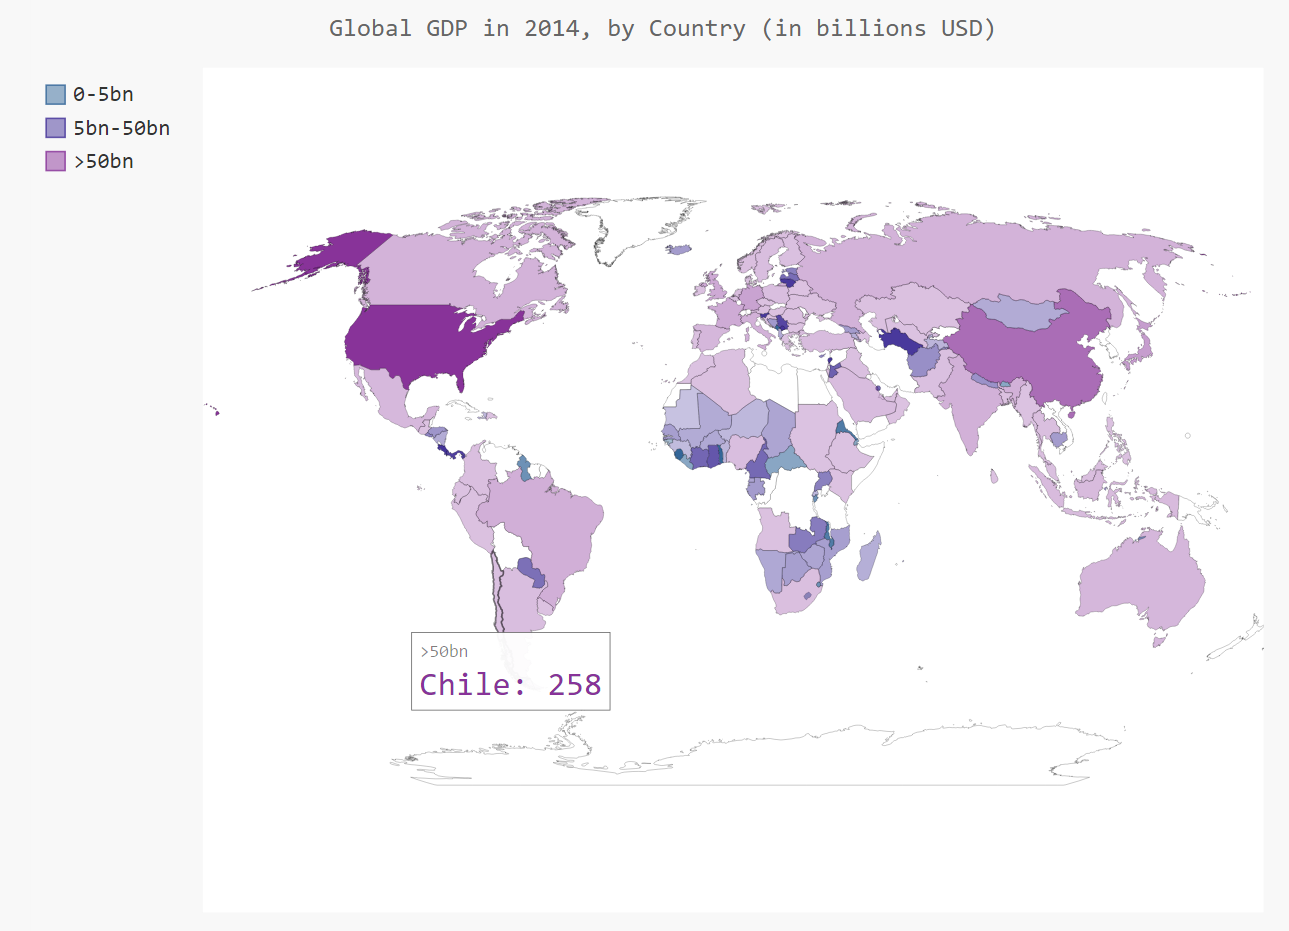 World map of GDP data, by country